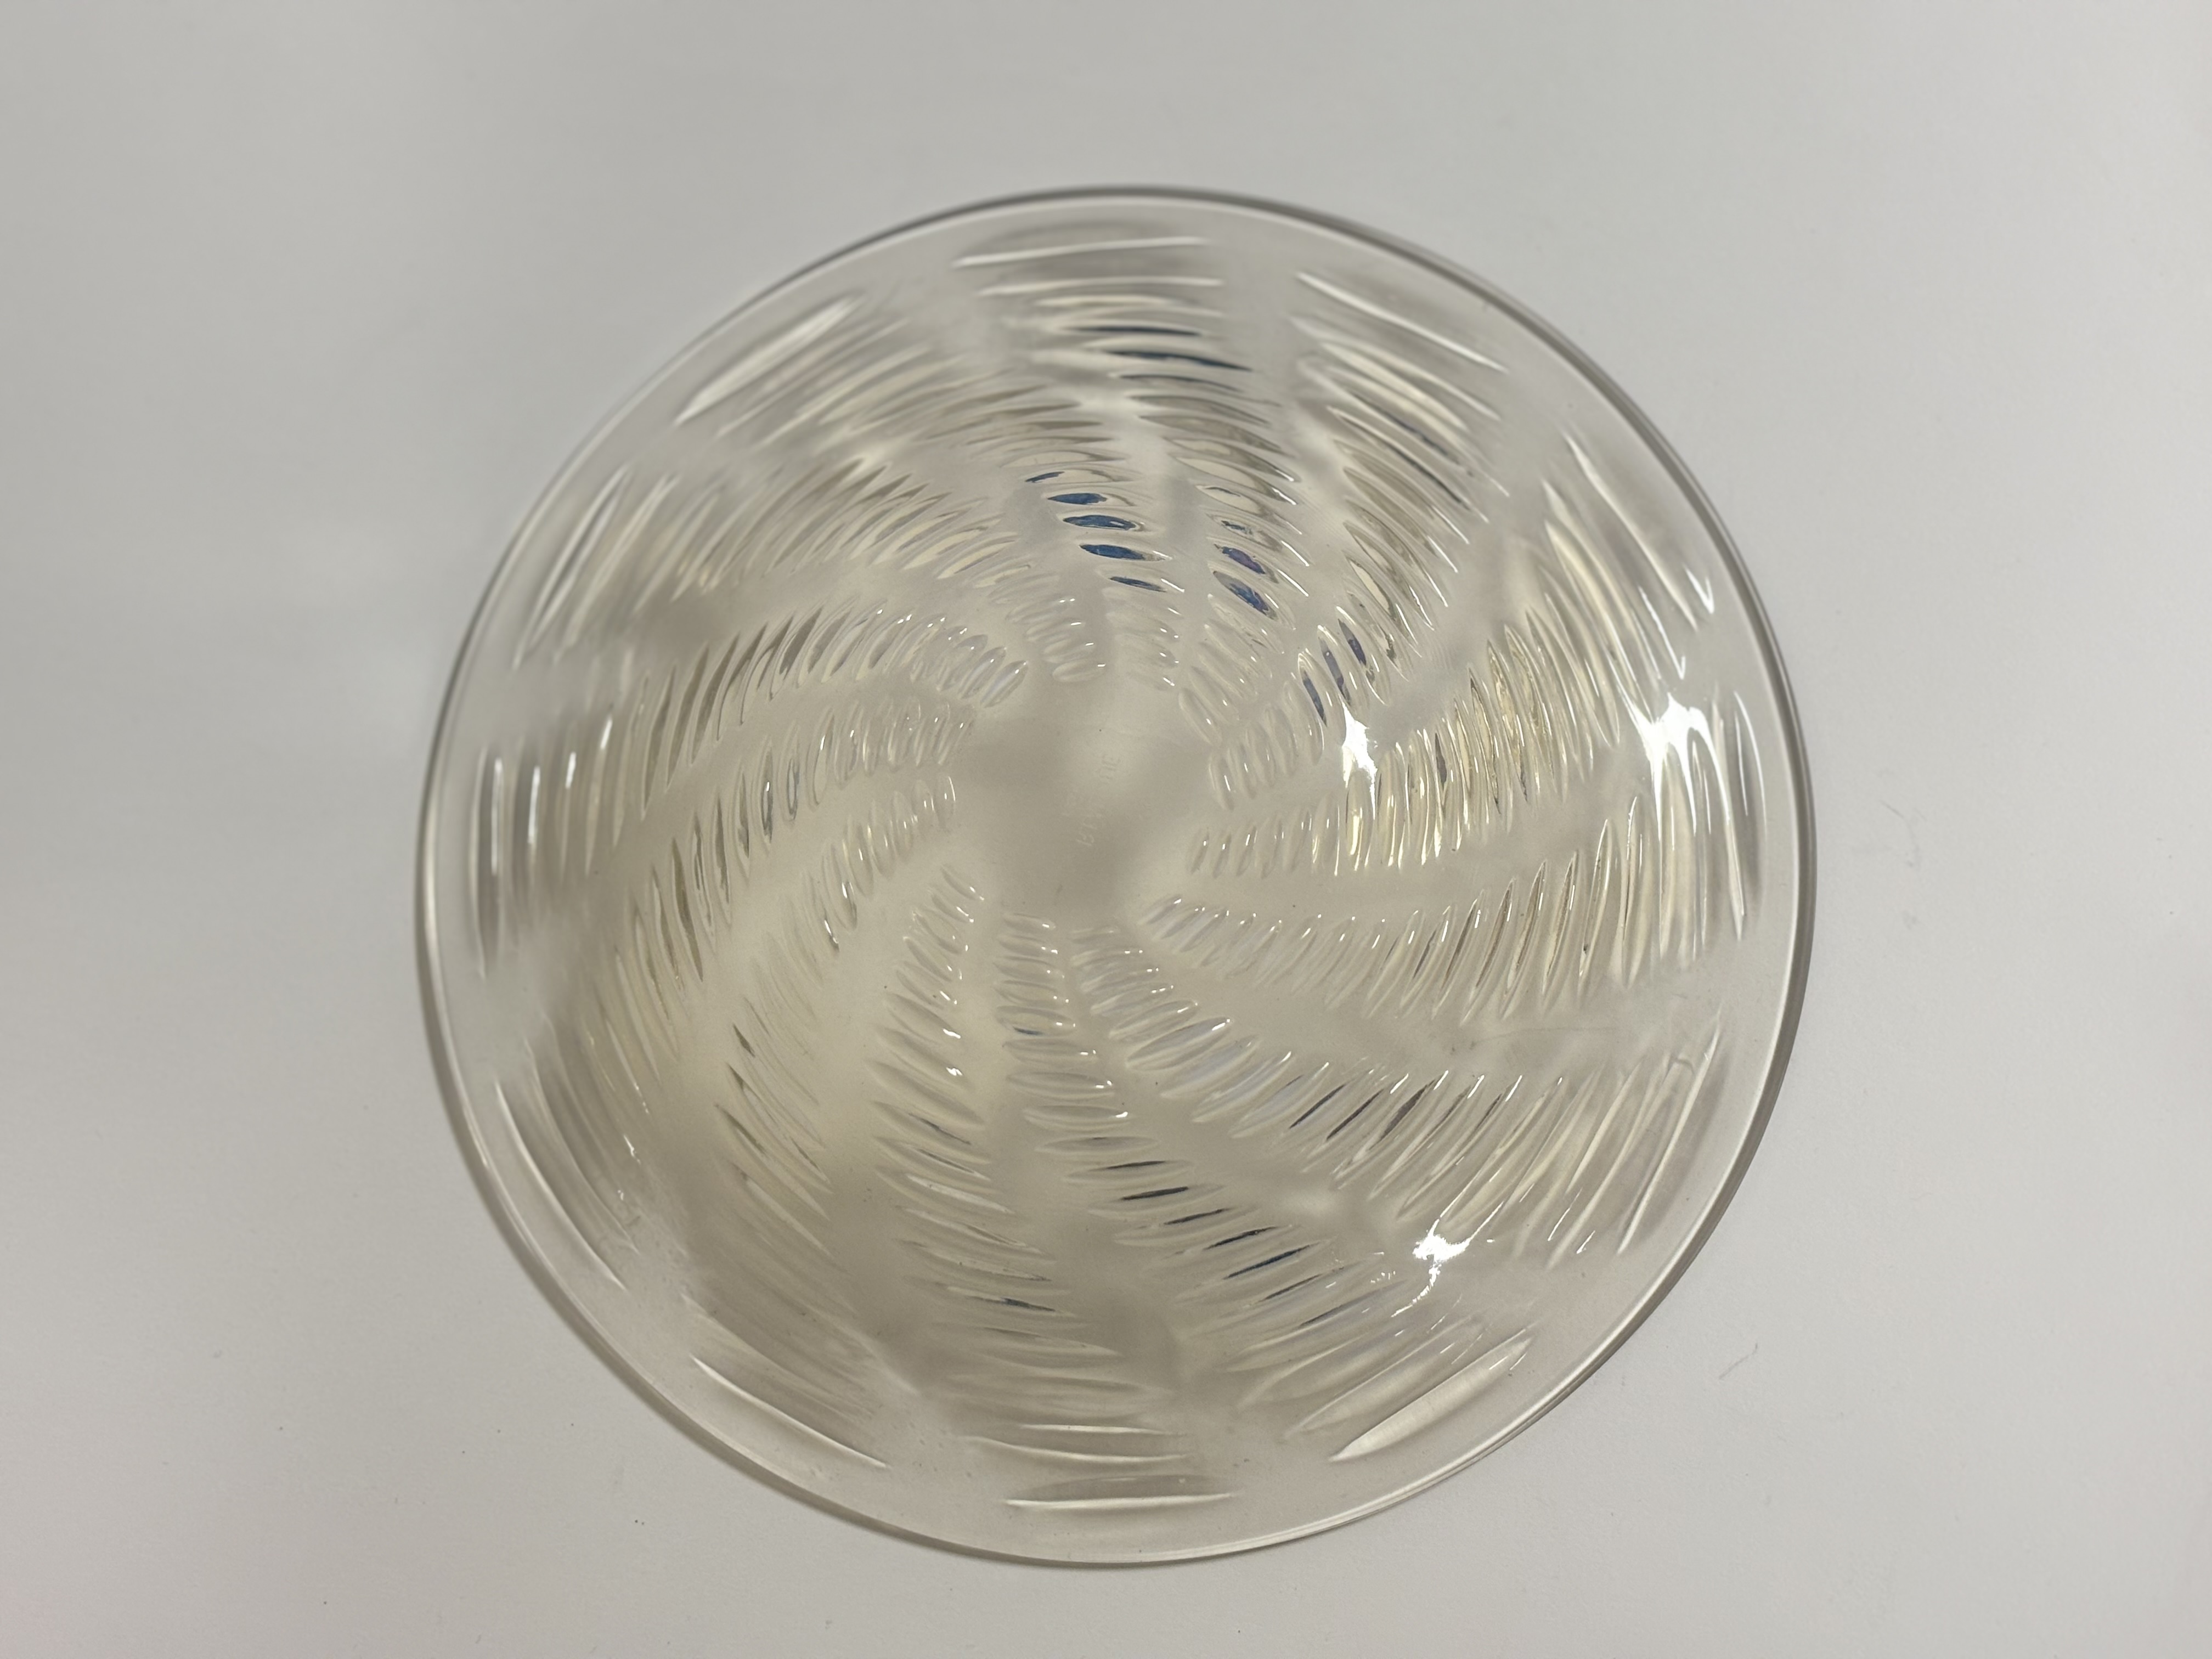 Lalique, Rene Lalique, Ondes pattern, a semi-opalescent glass coupe ouverte, etched mark (no - Image 4 of 5